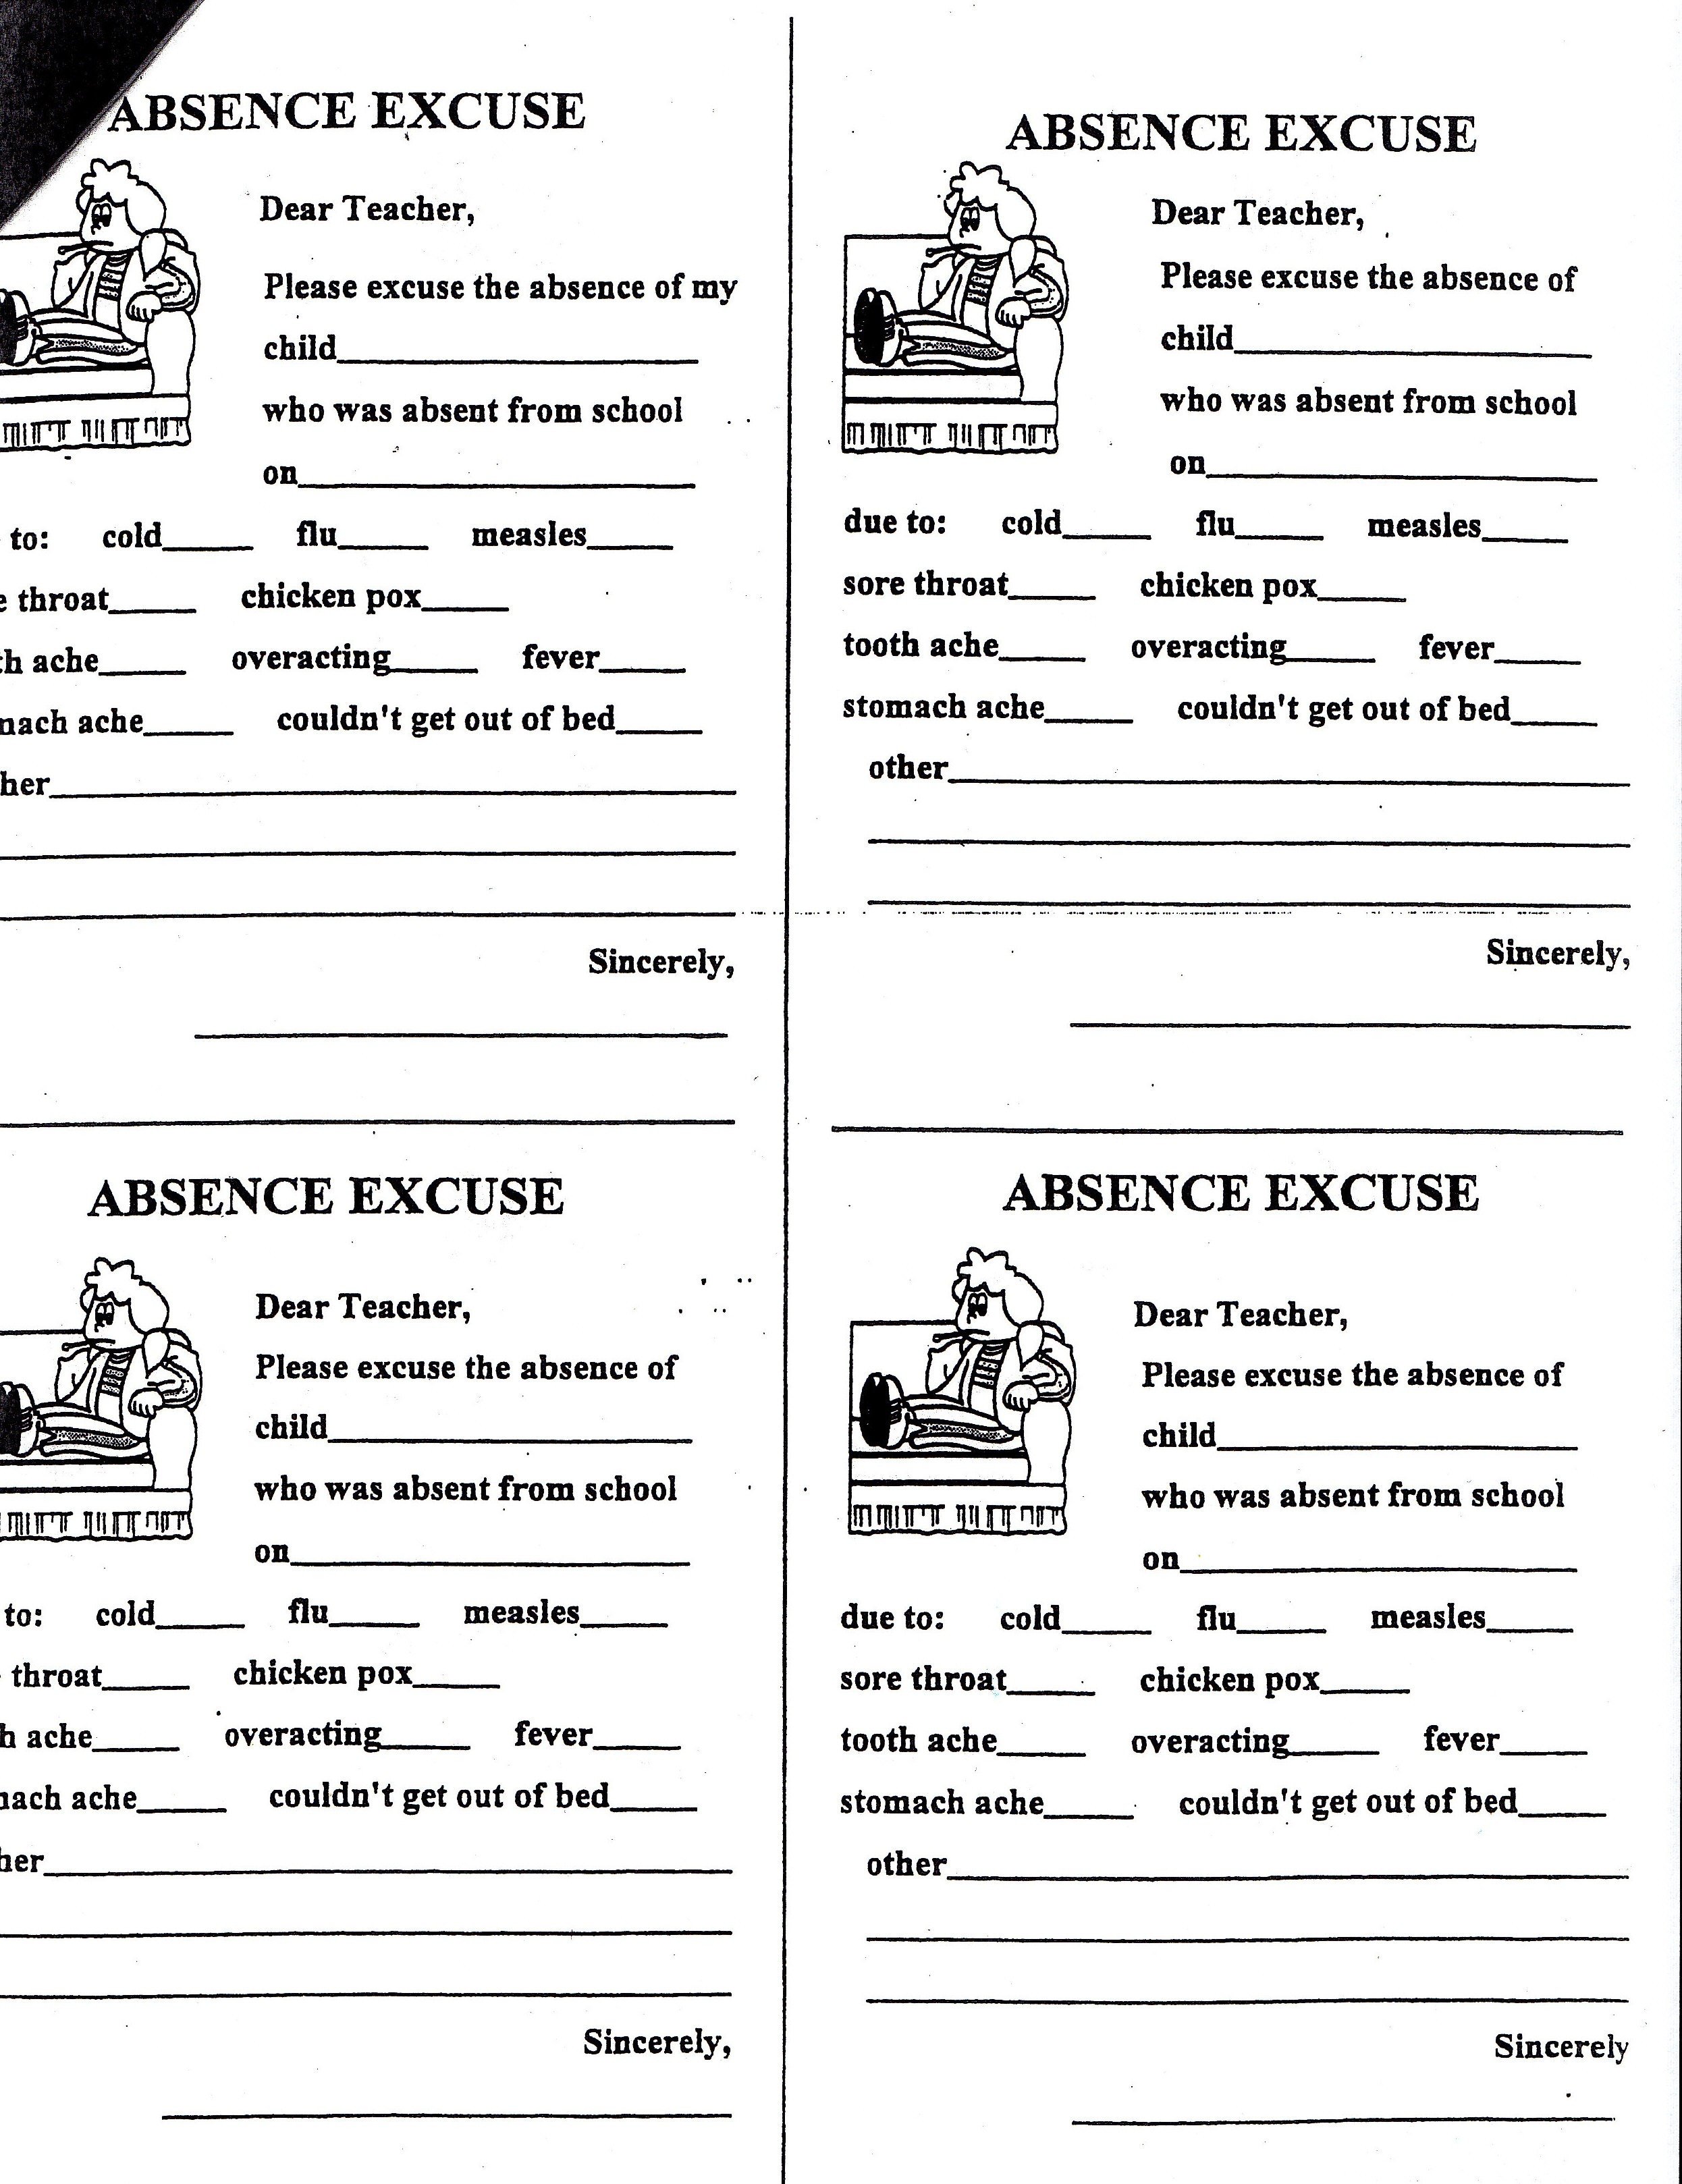 Absent Note for School Carrigan Gina Absence Note Printable